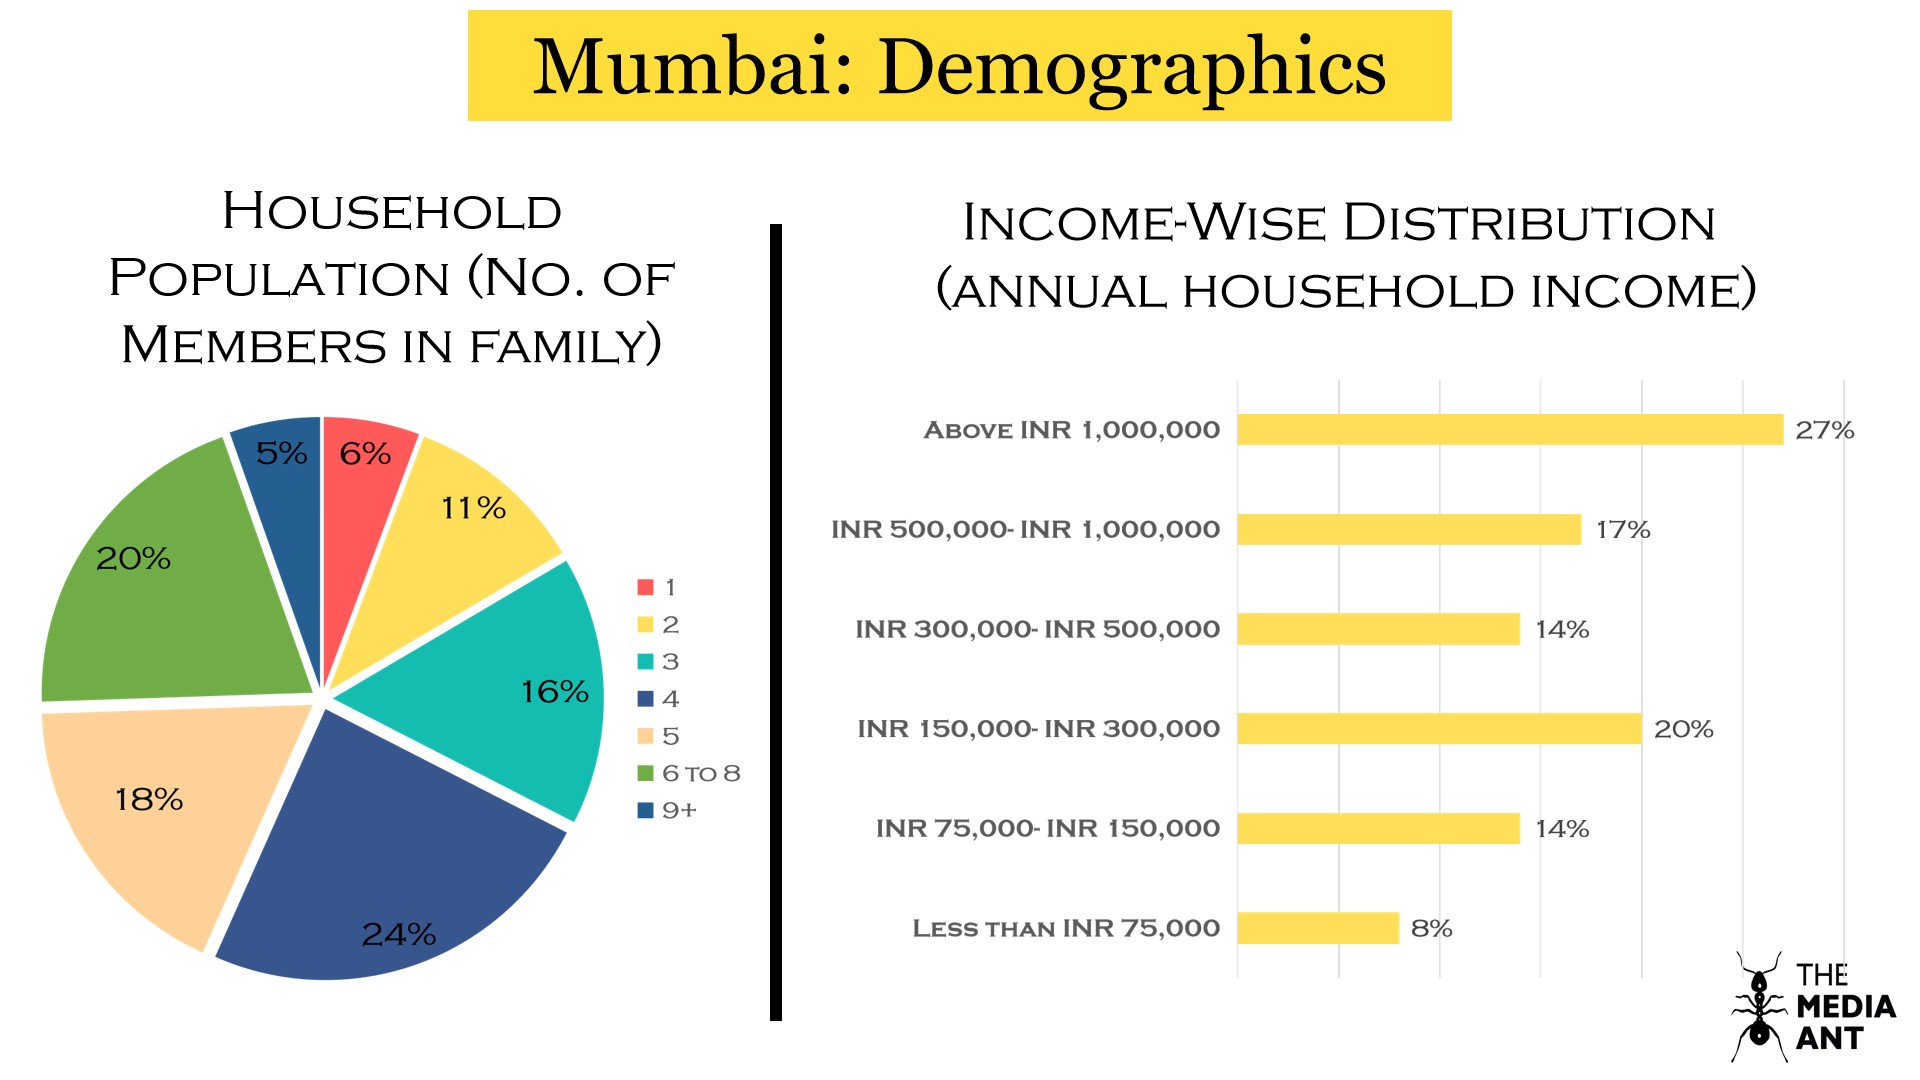 Mumbai household data and income wise household distribution